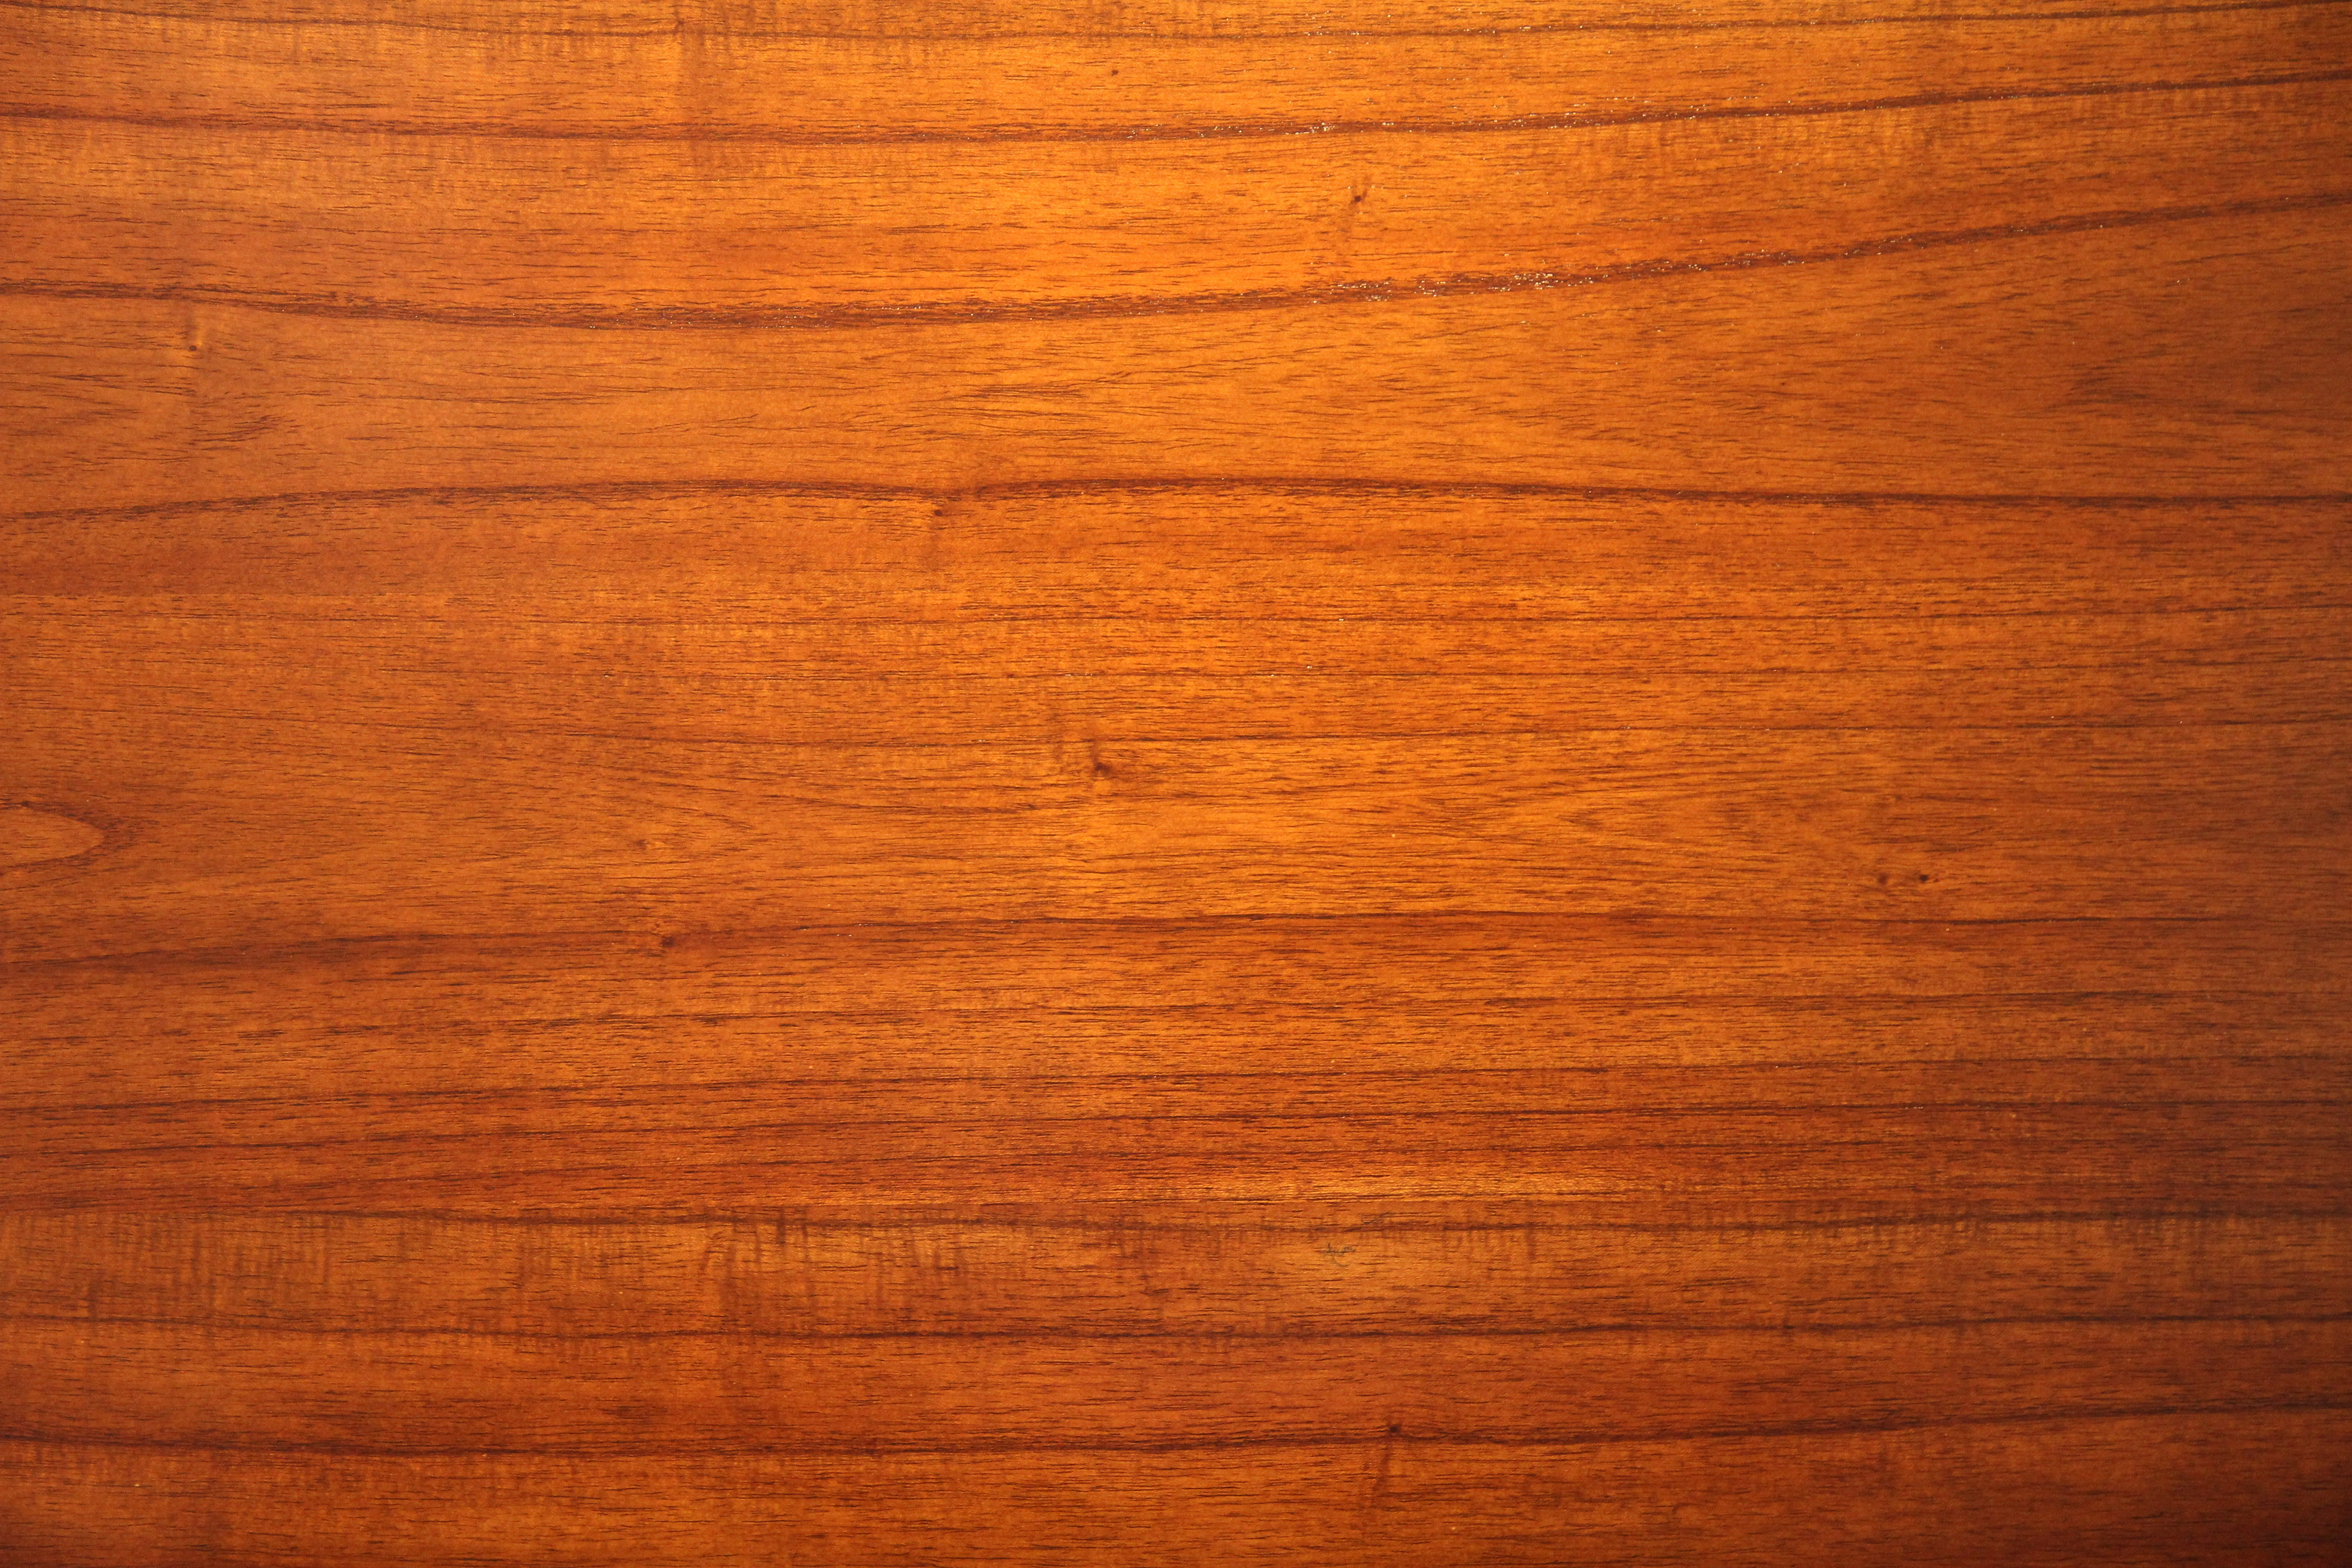 red-wood-texture-grain-natural-wooden-paneling-surface-photo ...